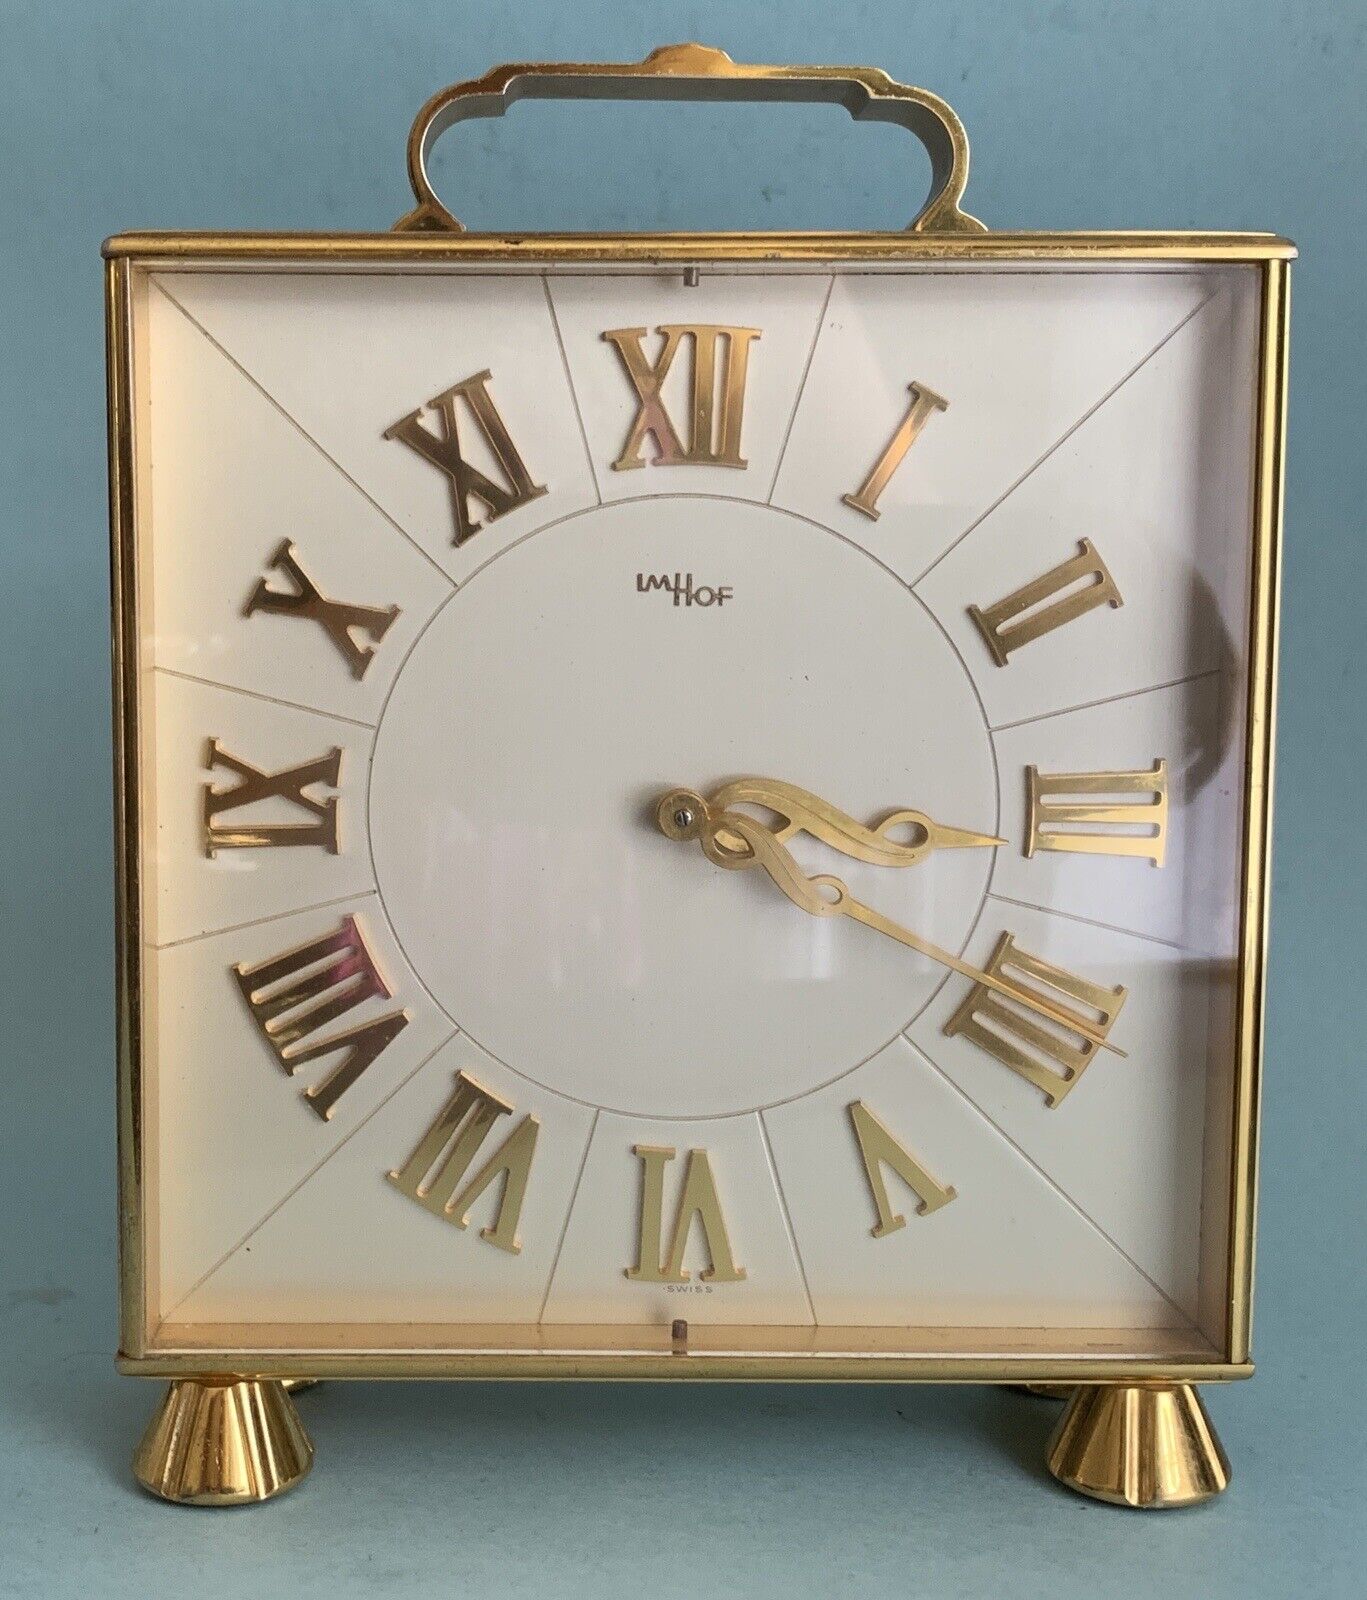 VINTAGE-IMHOF-ART DECO STYLE-DESK CLOCK-15 JEWELS-SWISS-WORKING-ACCURATE TIME